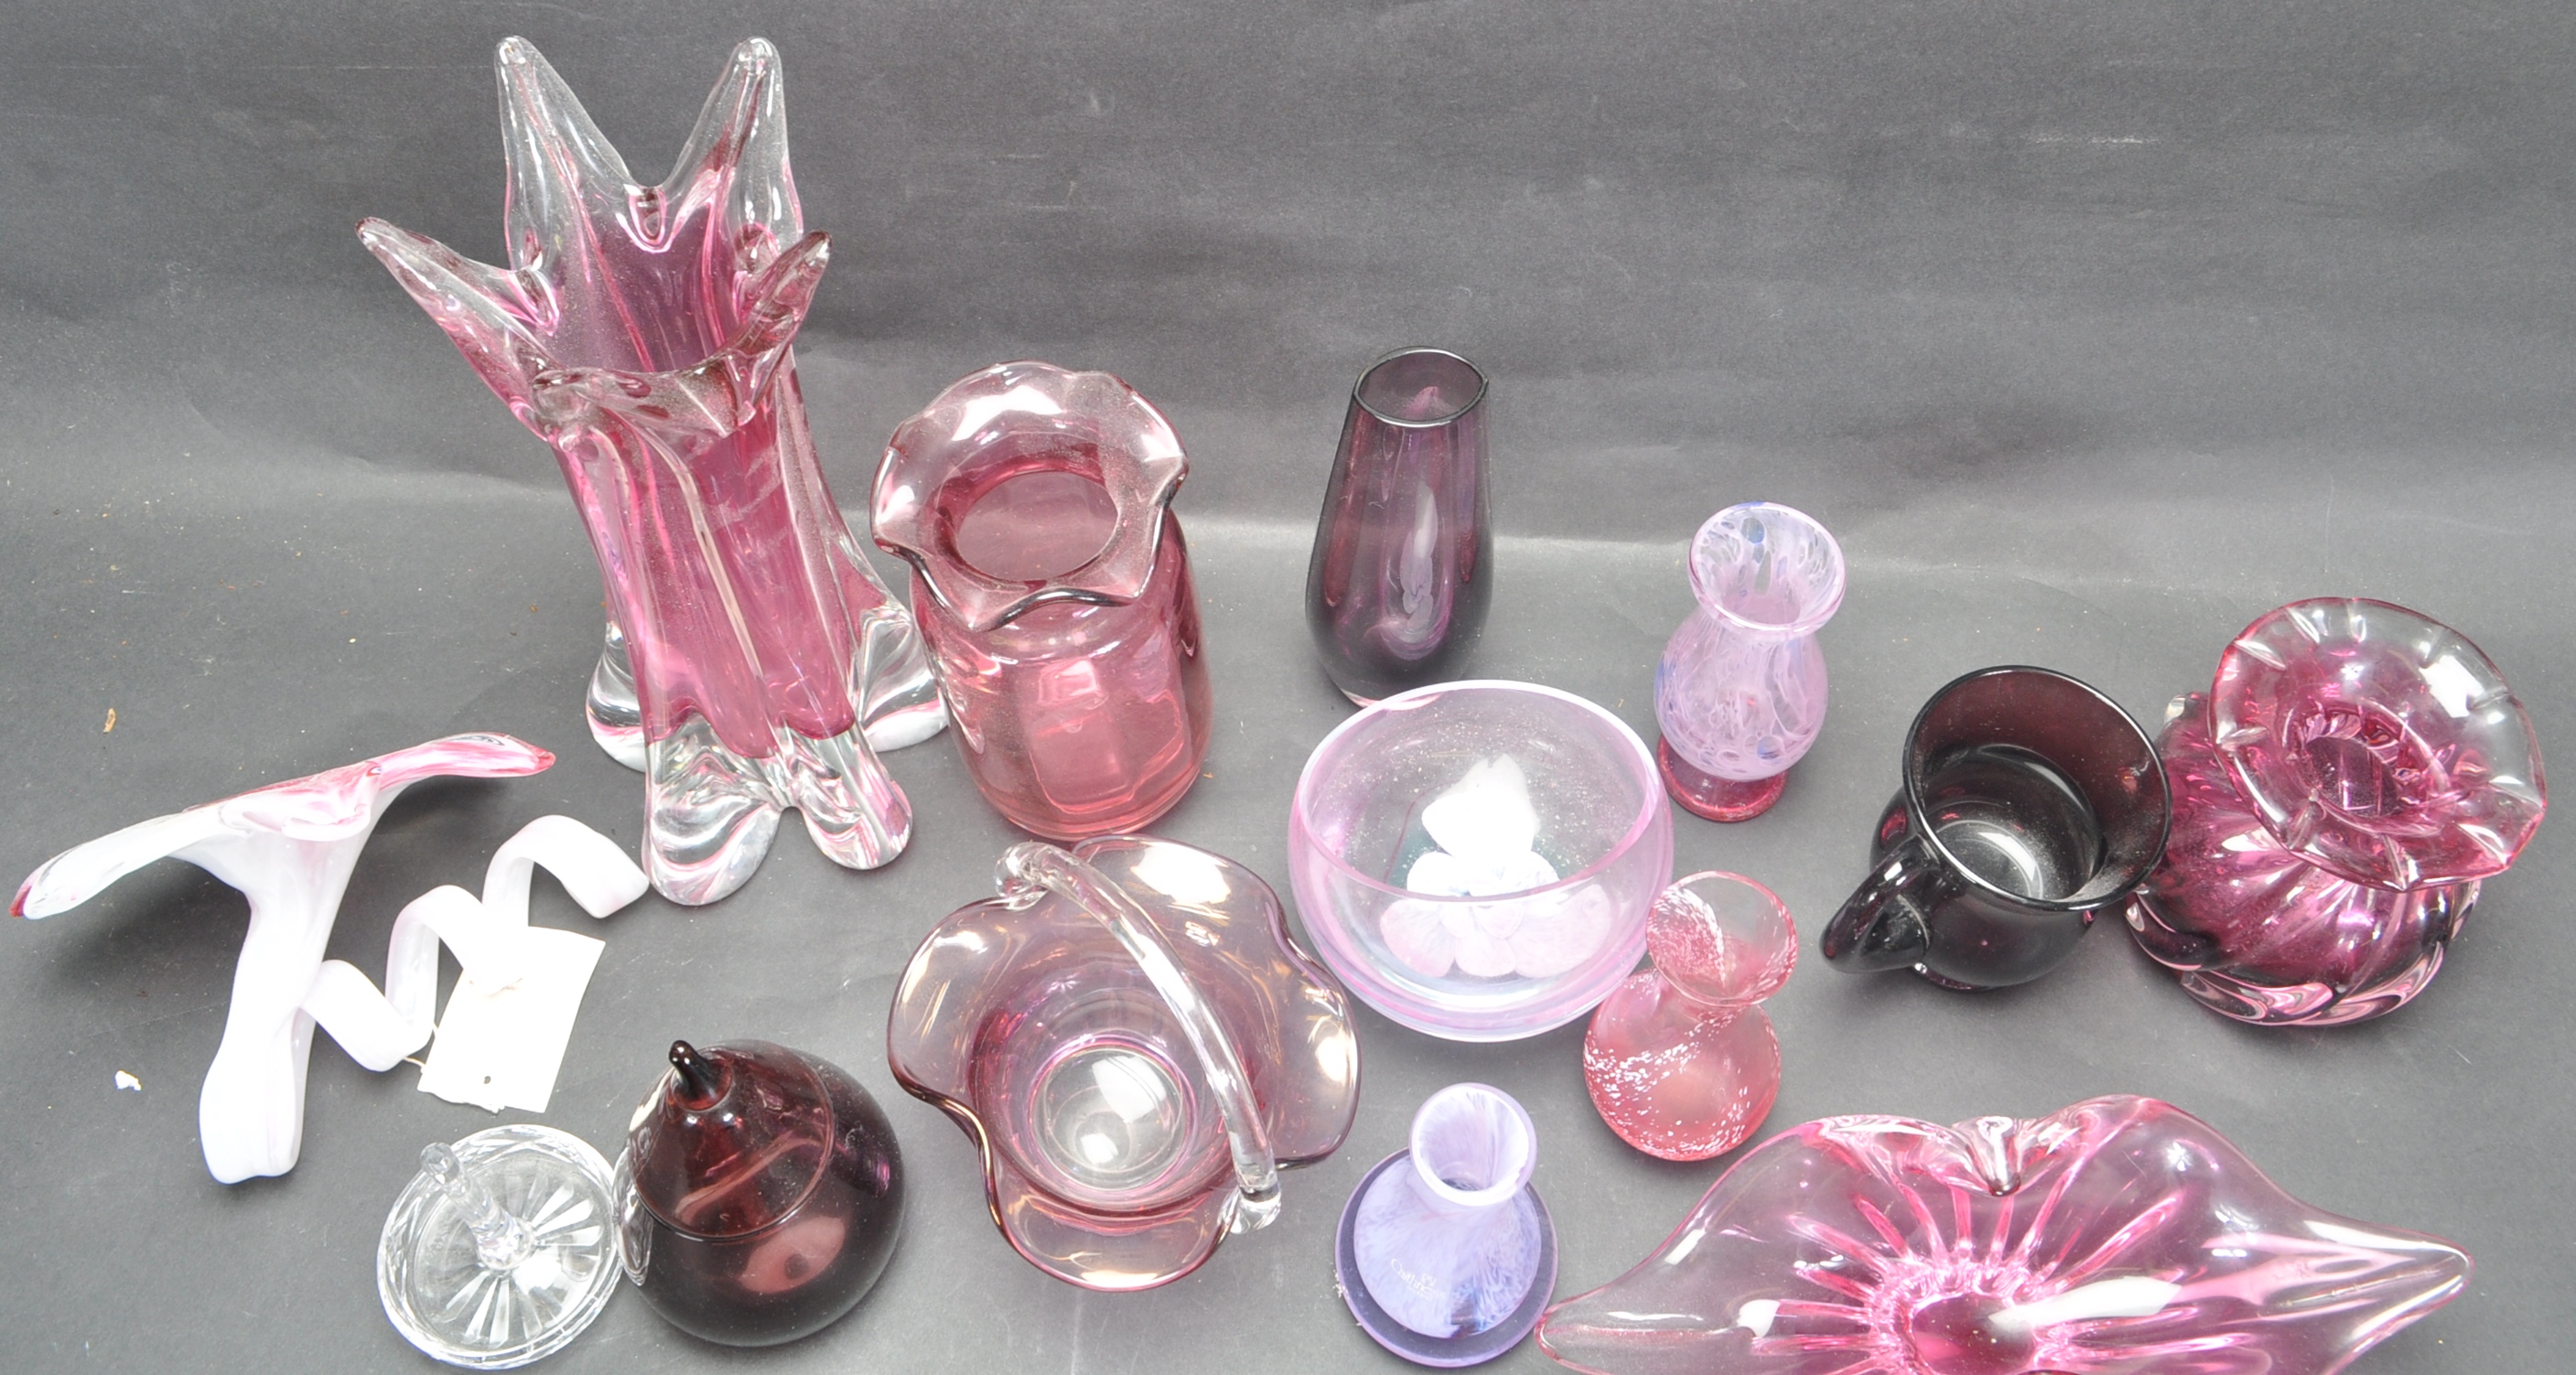 COLLECTION OF 20TH CENTURY GLASS VASES AND ORNAMENTS. - Image 5 of 9